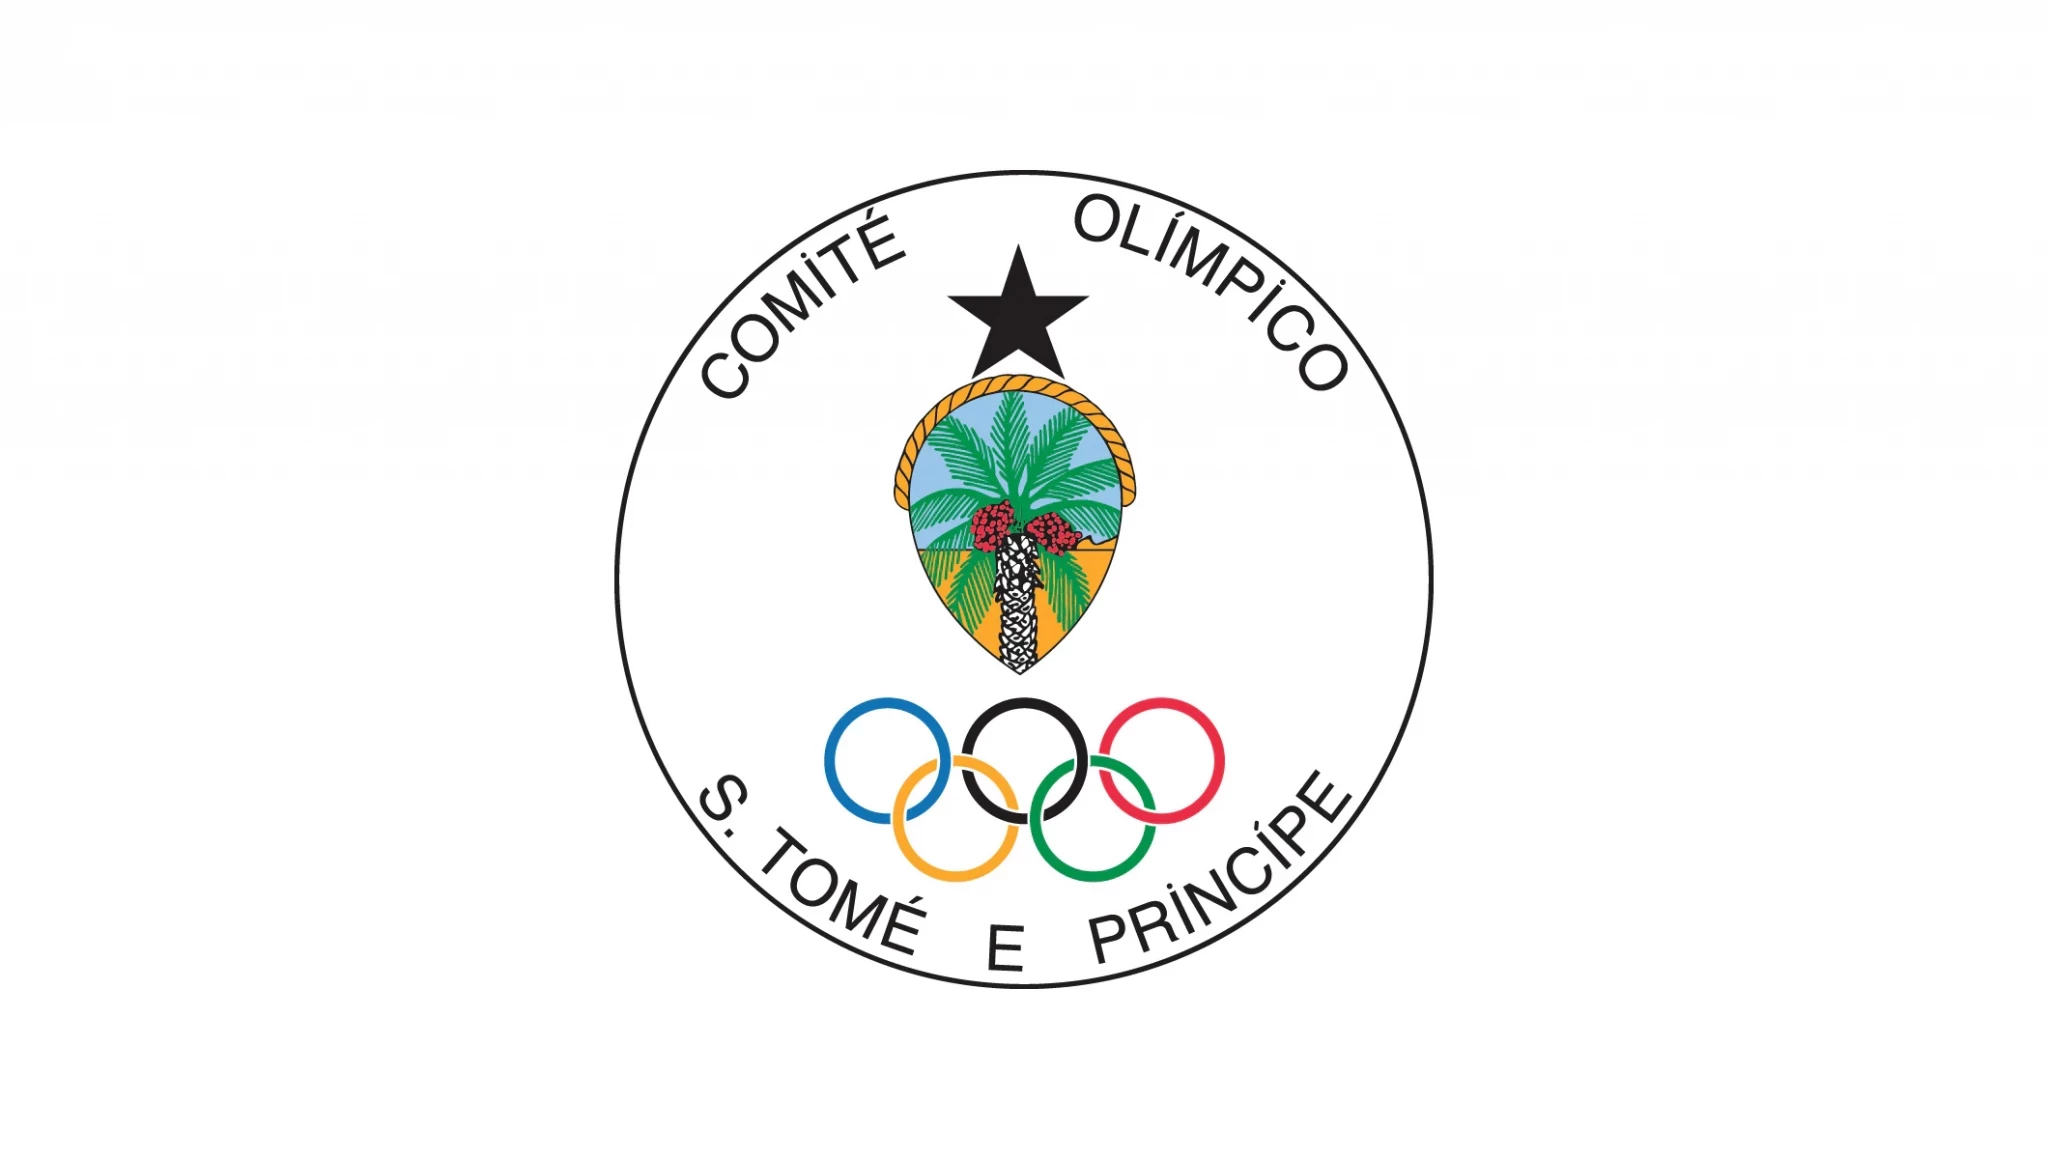 São Tomé and Príncipe National Olympic Committee hold video conference to discuss COVID-19 response